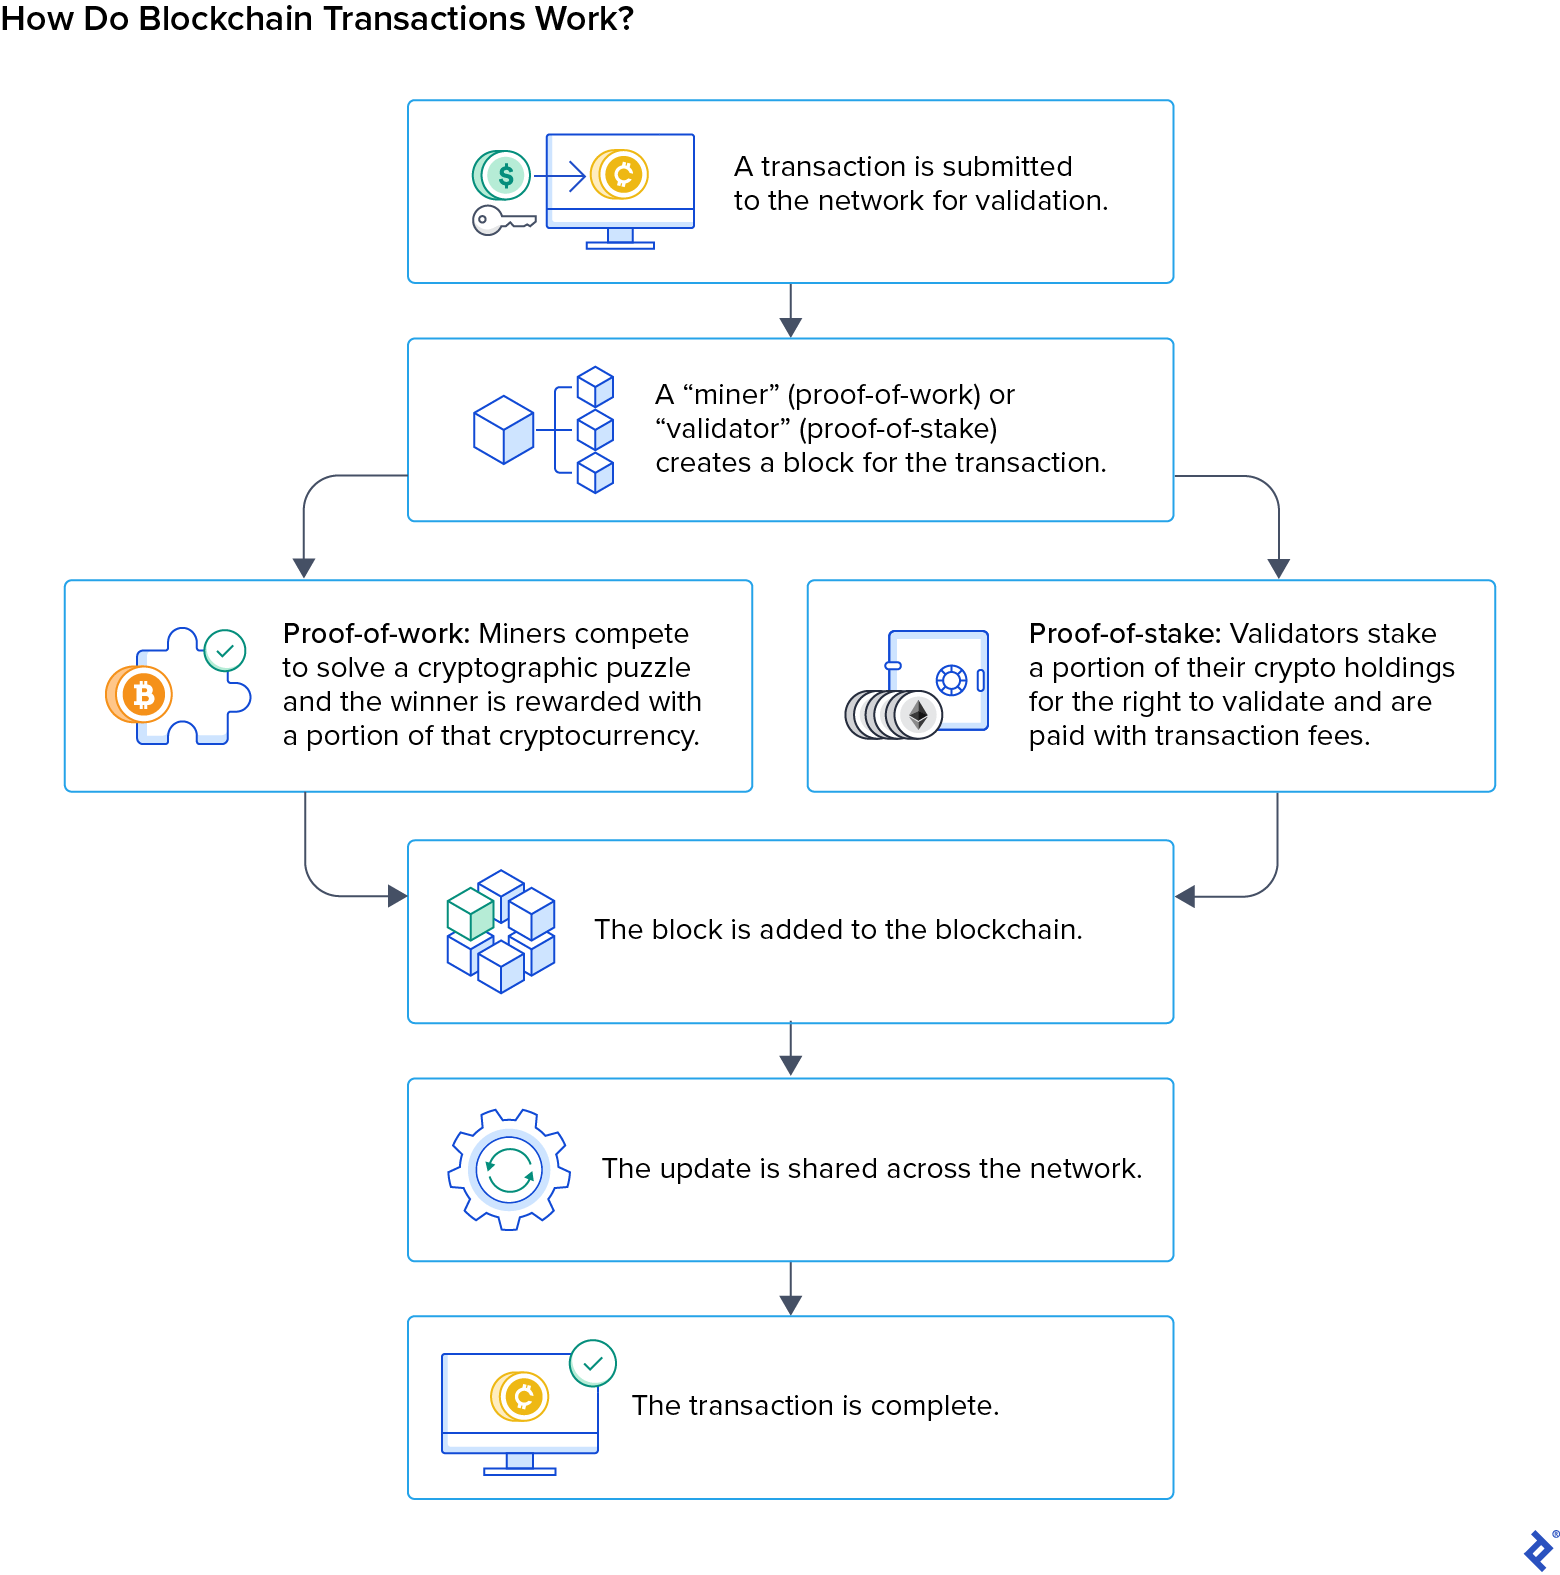 How do blockchain transactions work? This infographic presents the steps for mining or validating cryptocurrency transactions.